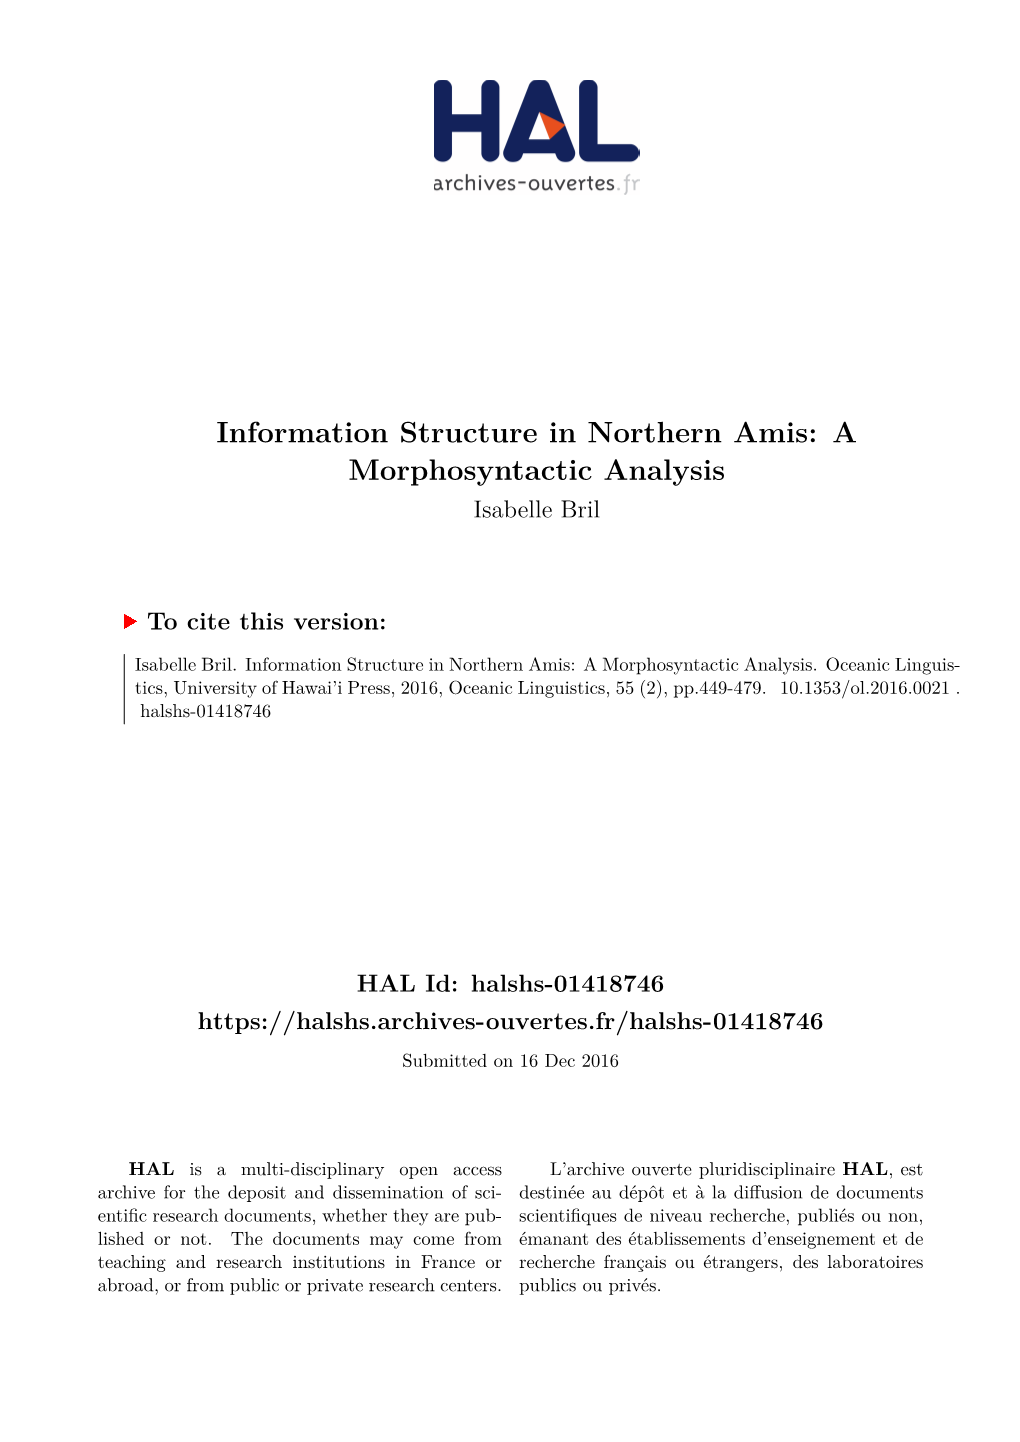 Information Structure in Northern Amis: a Morphosyntactic Analysis Isabelle Bril